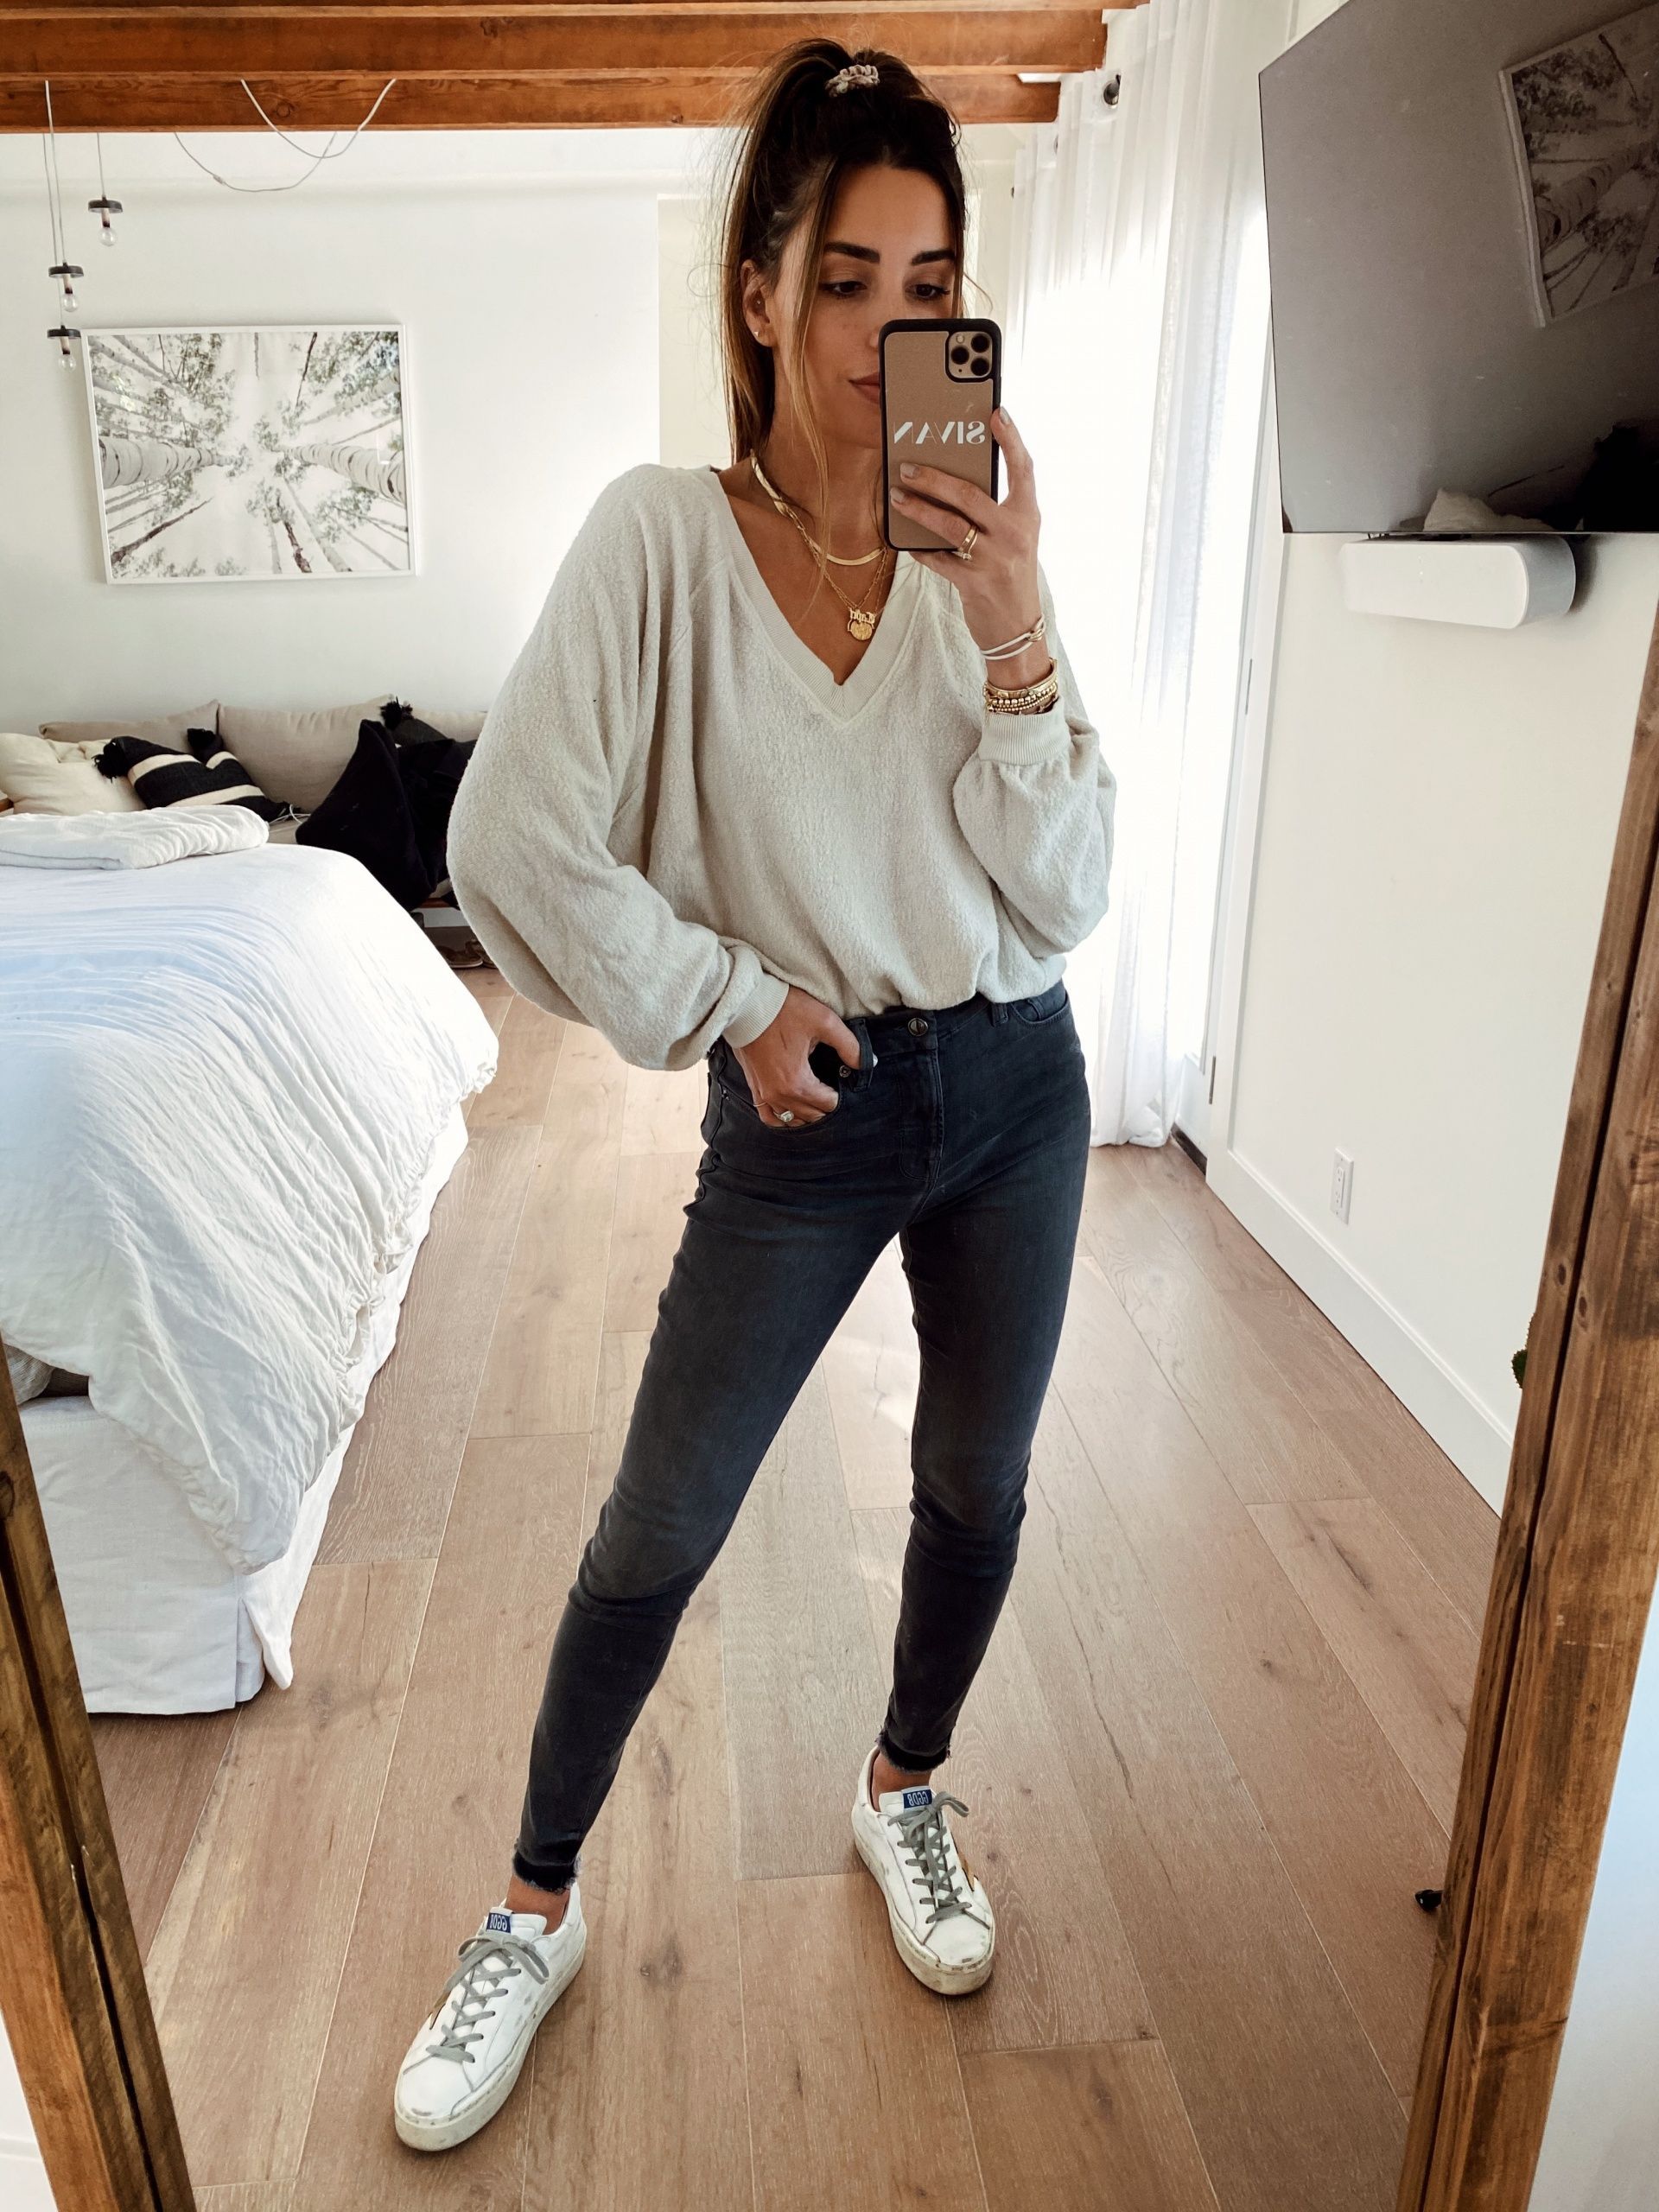 The 7 Pairs of Jeans I Live In | Sivan Ayla - The 7 Pairs of Jeans I Live In | Sivan Ayla -   8 style Jeans school ideas